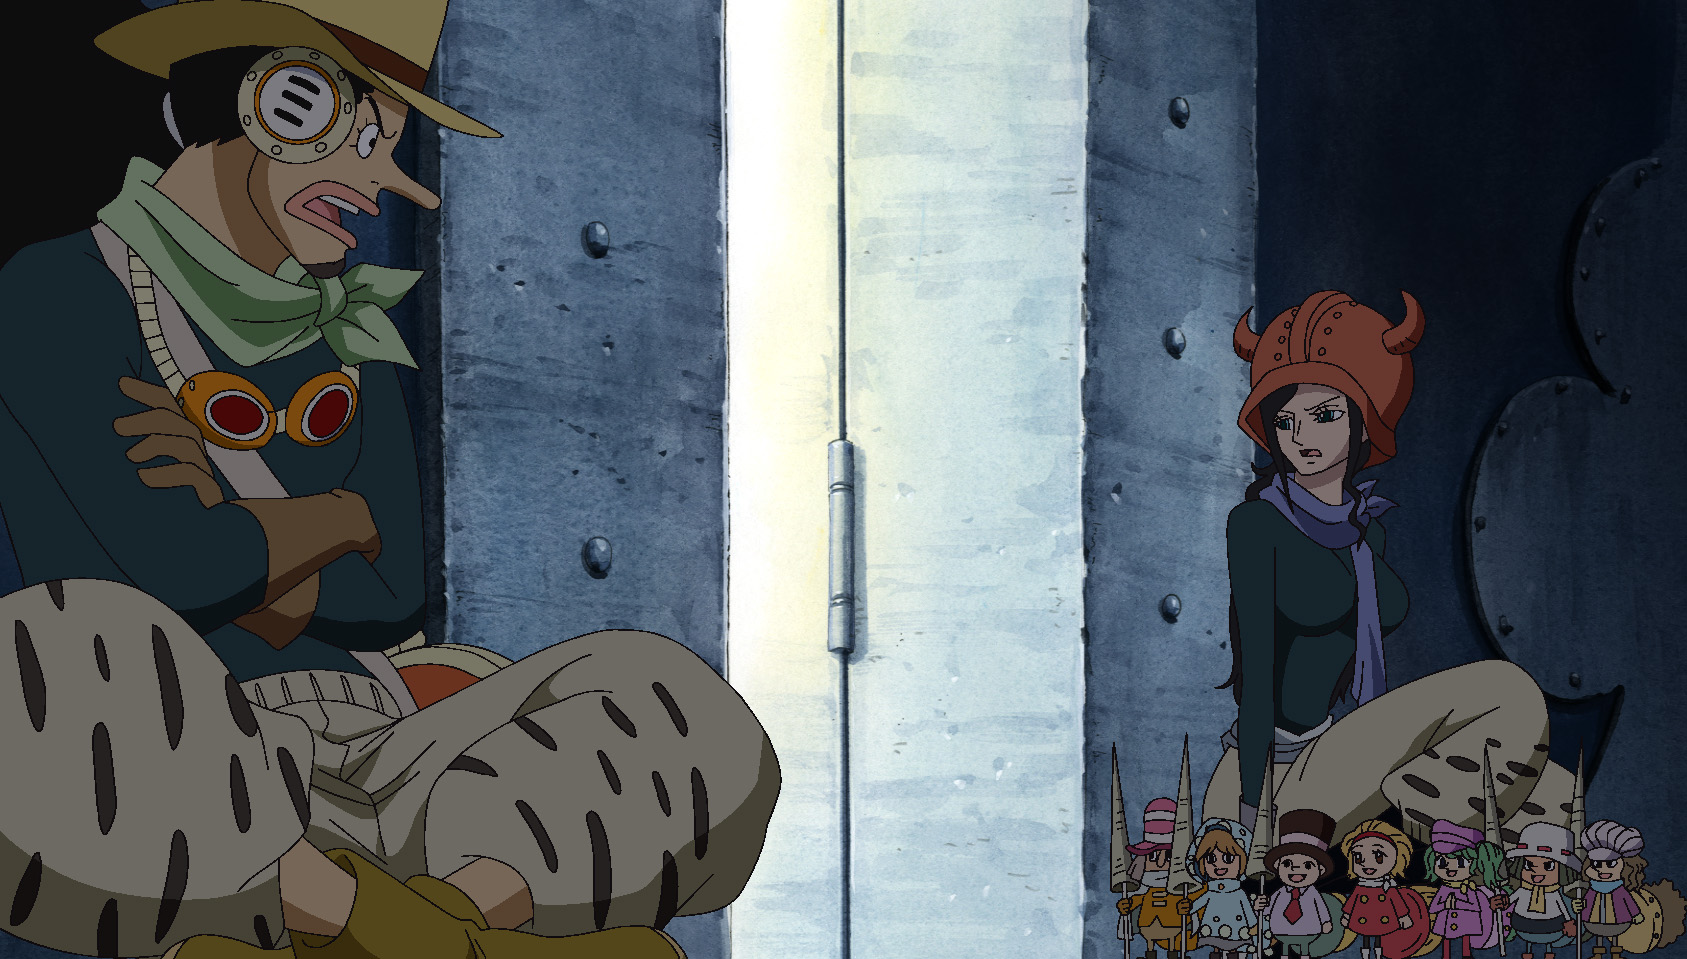 One Piece Season 11 Episode 666 The End Of The Match A Surprising Result Of Block D Uncut English Video Player Is Loading Play Video Loaded 0 Marathon Lights Language English Language Japanese English Subtitles Subtitles Version Uncut